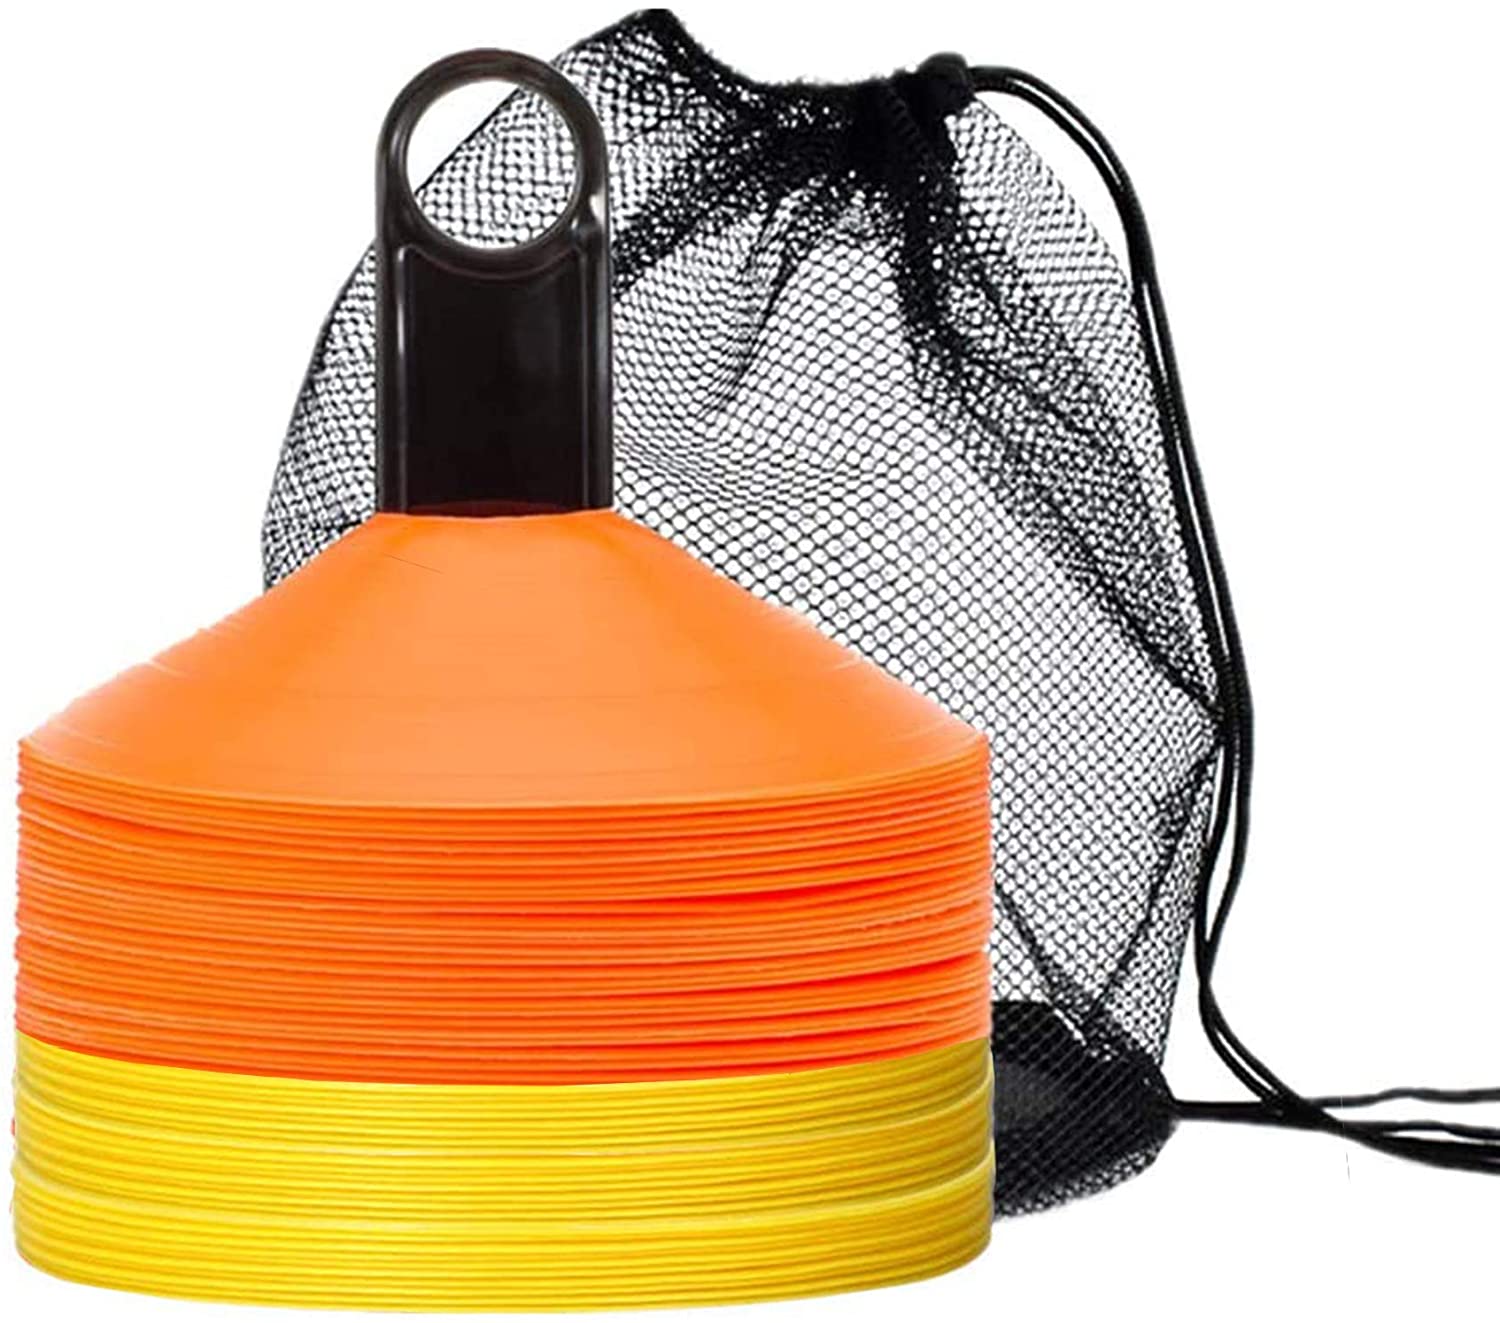 FGBNM Disc Cones, 25/50/100/200 Pack Agility Soccer Cones with Carry Bag  and Holder, Soccer Cones for Sports Training, Football, Soccer, Basketball